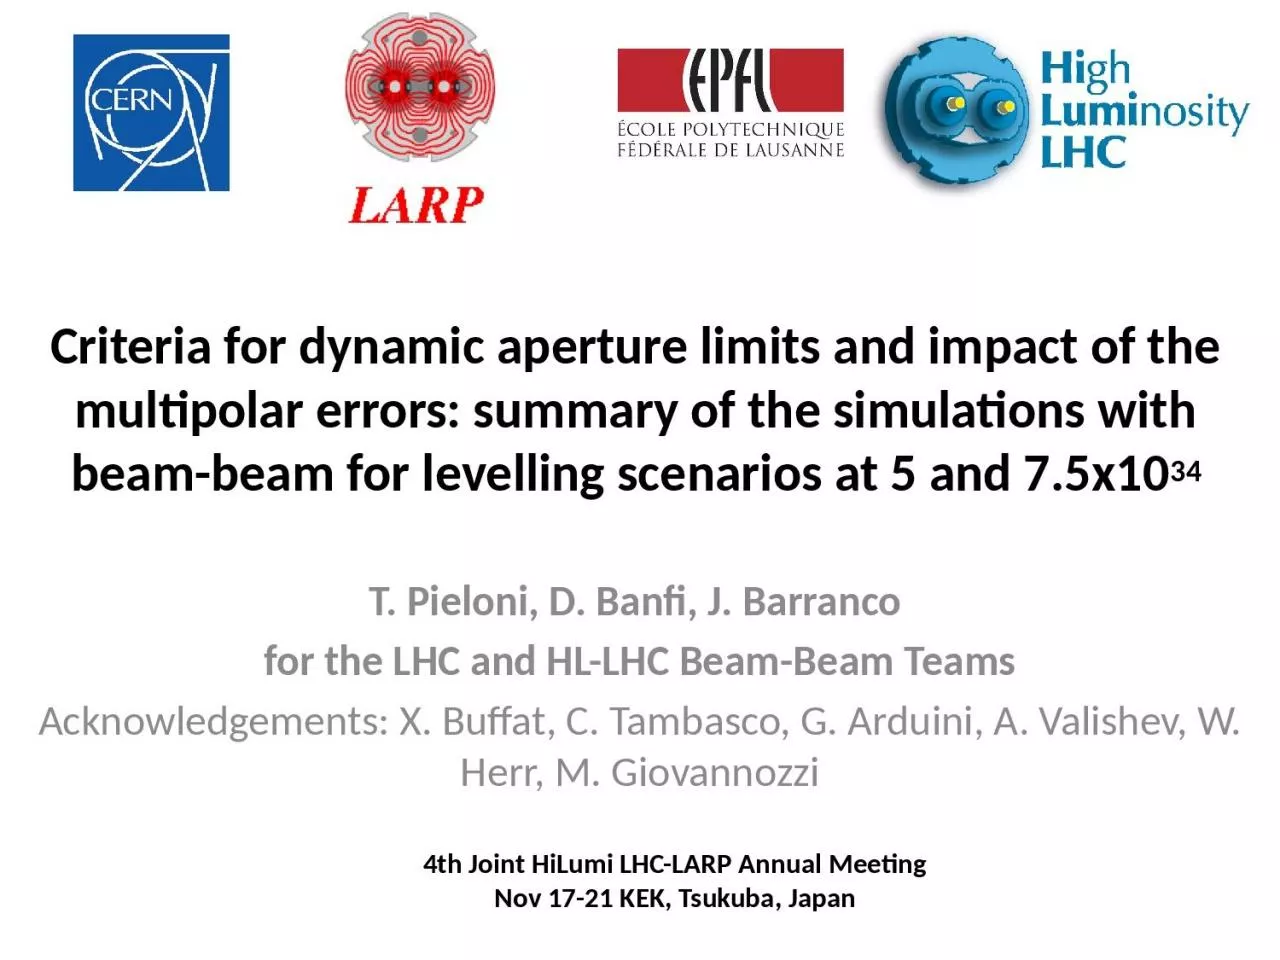 Criteria for dynamic aperture limits and impact of the multipolar errors: summary of the